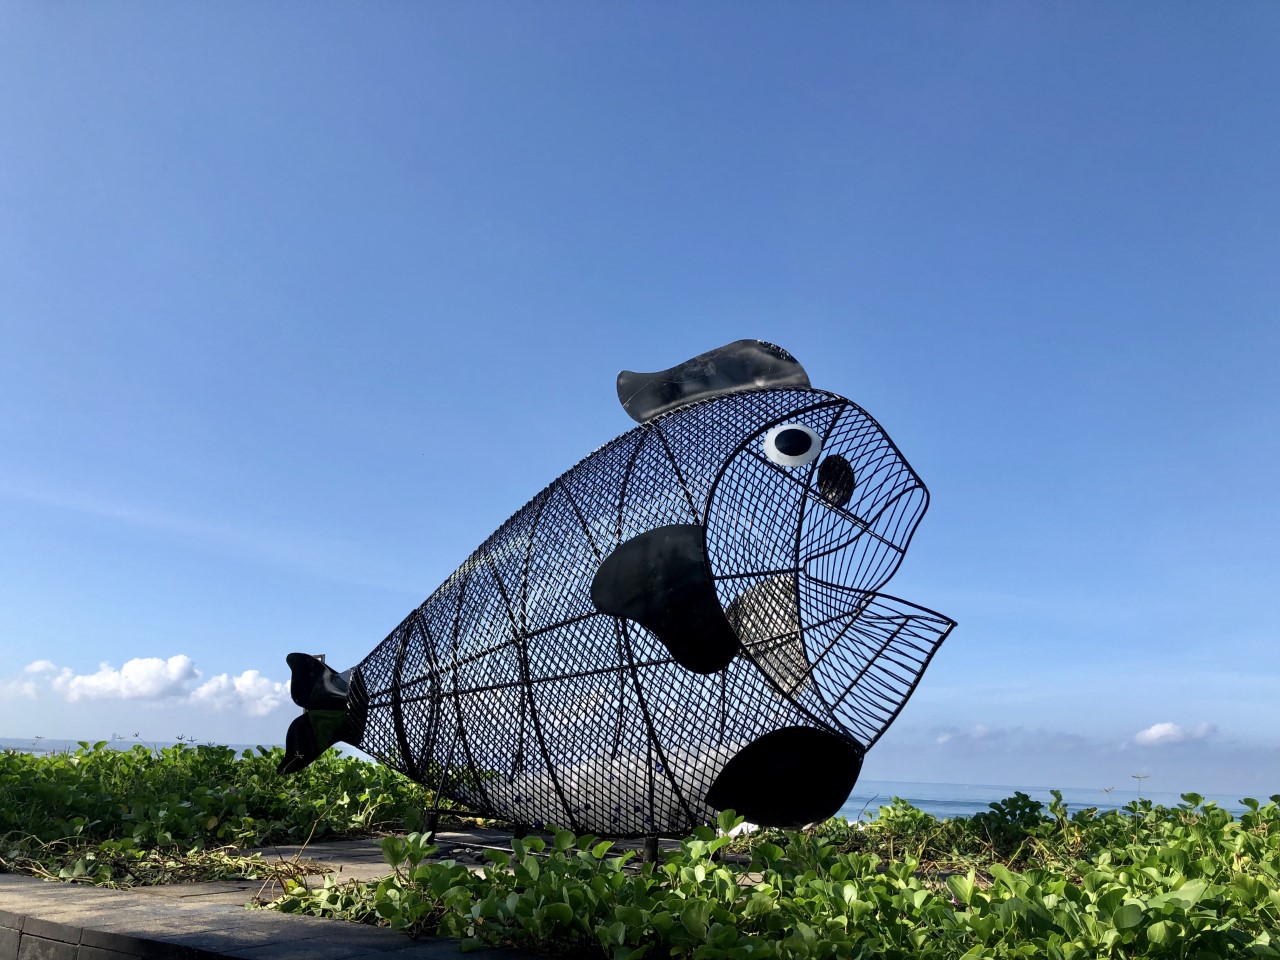 “We saw a similar installation on social media and begun researching it. We found out the fish was installed on a beach with a sign saying, ‘Goby loves plastic, please feed him!’, and we embraced the idea.” — Craig Seaward, General Manager of W Bali – Seminyak